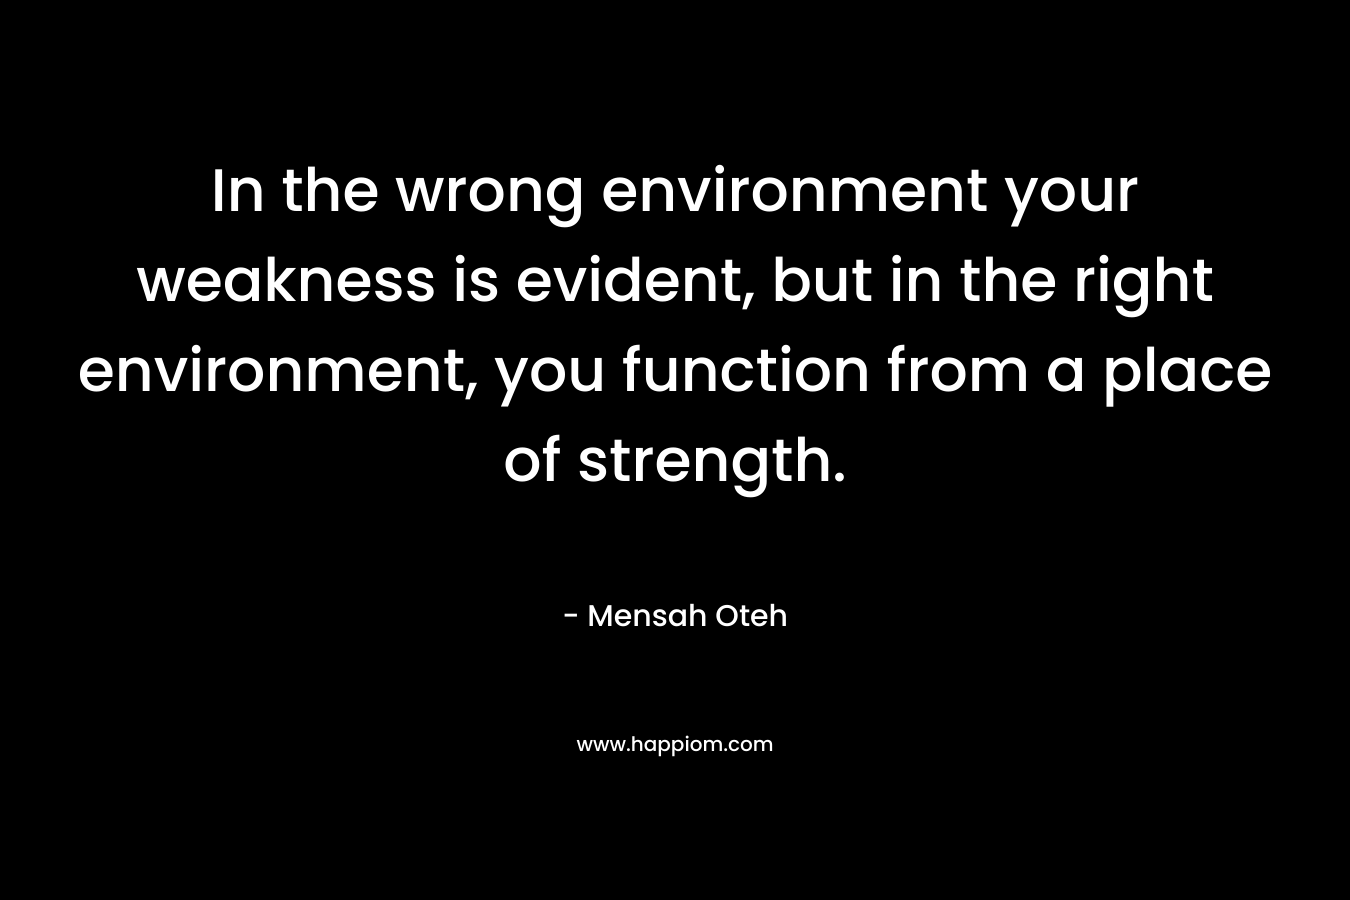 In the wrong environment your weakness is evident, but in the right environment, you function from a place of strength.